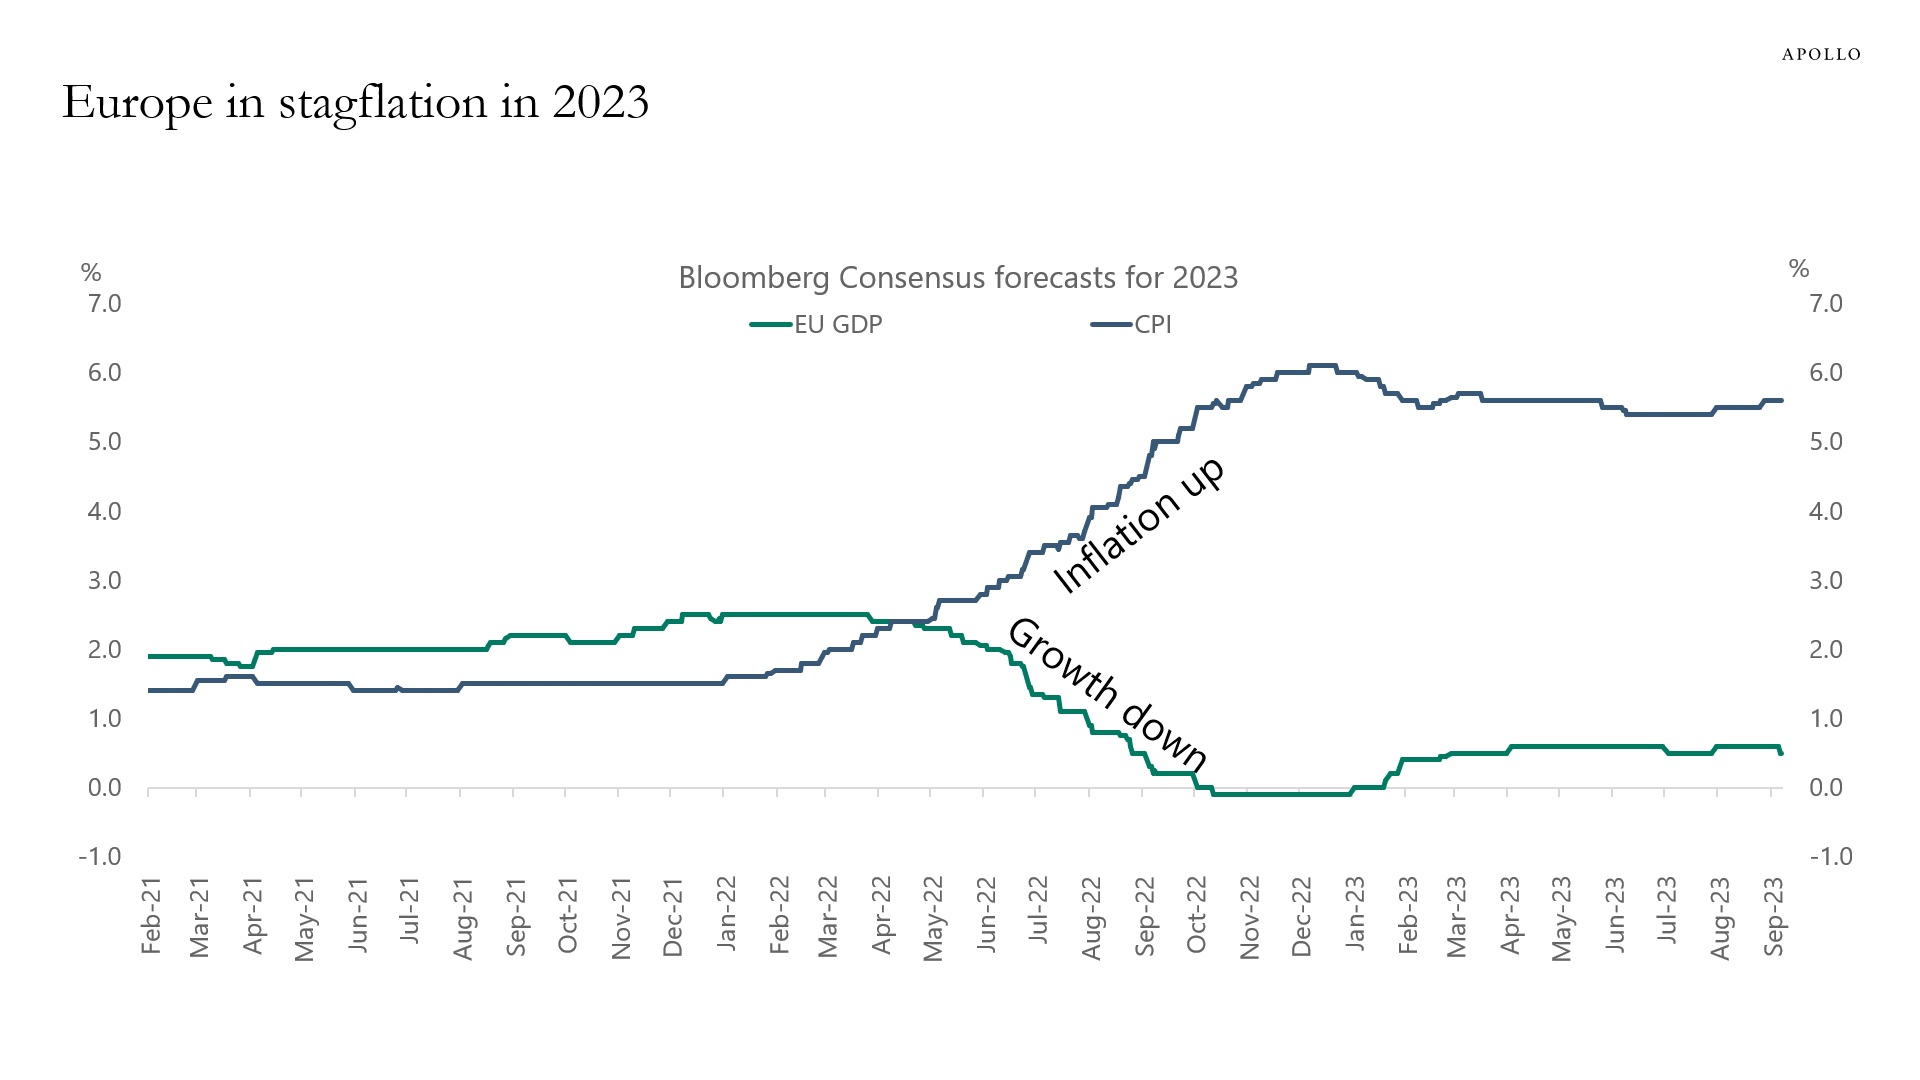 Consensus expects stagflation for Europe in 2023